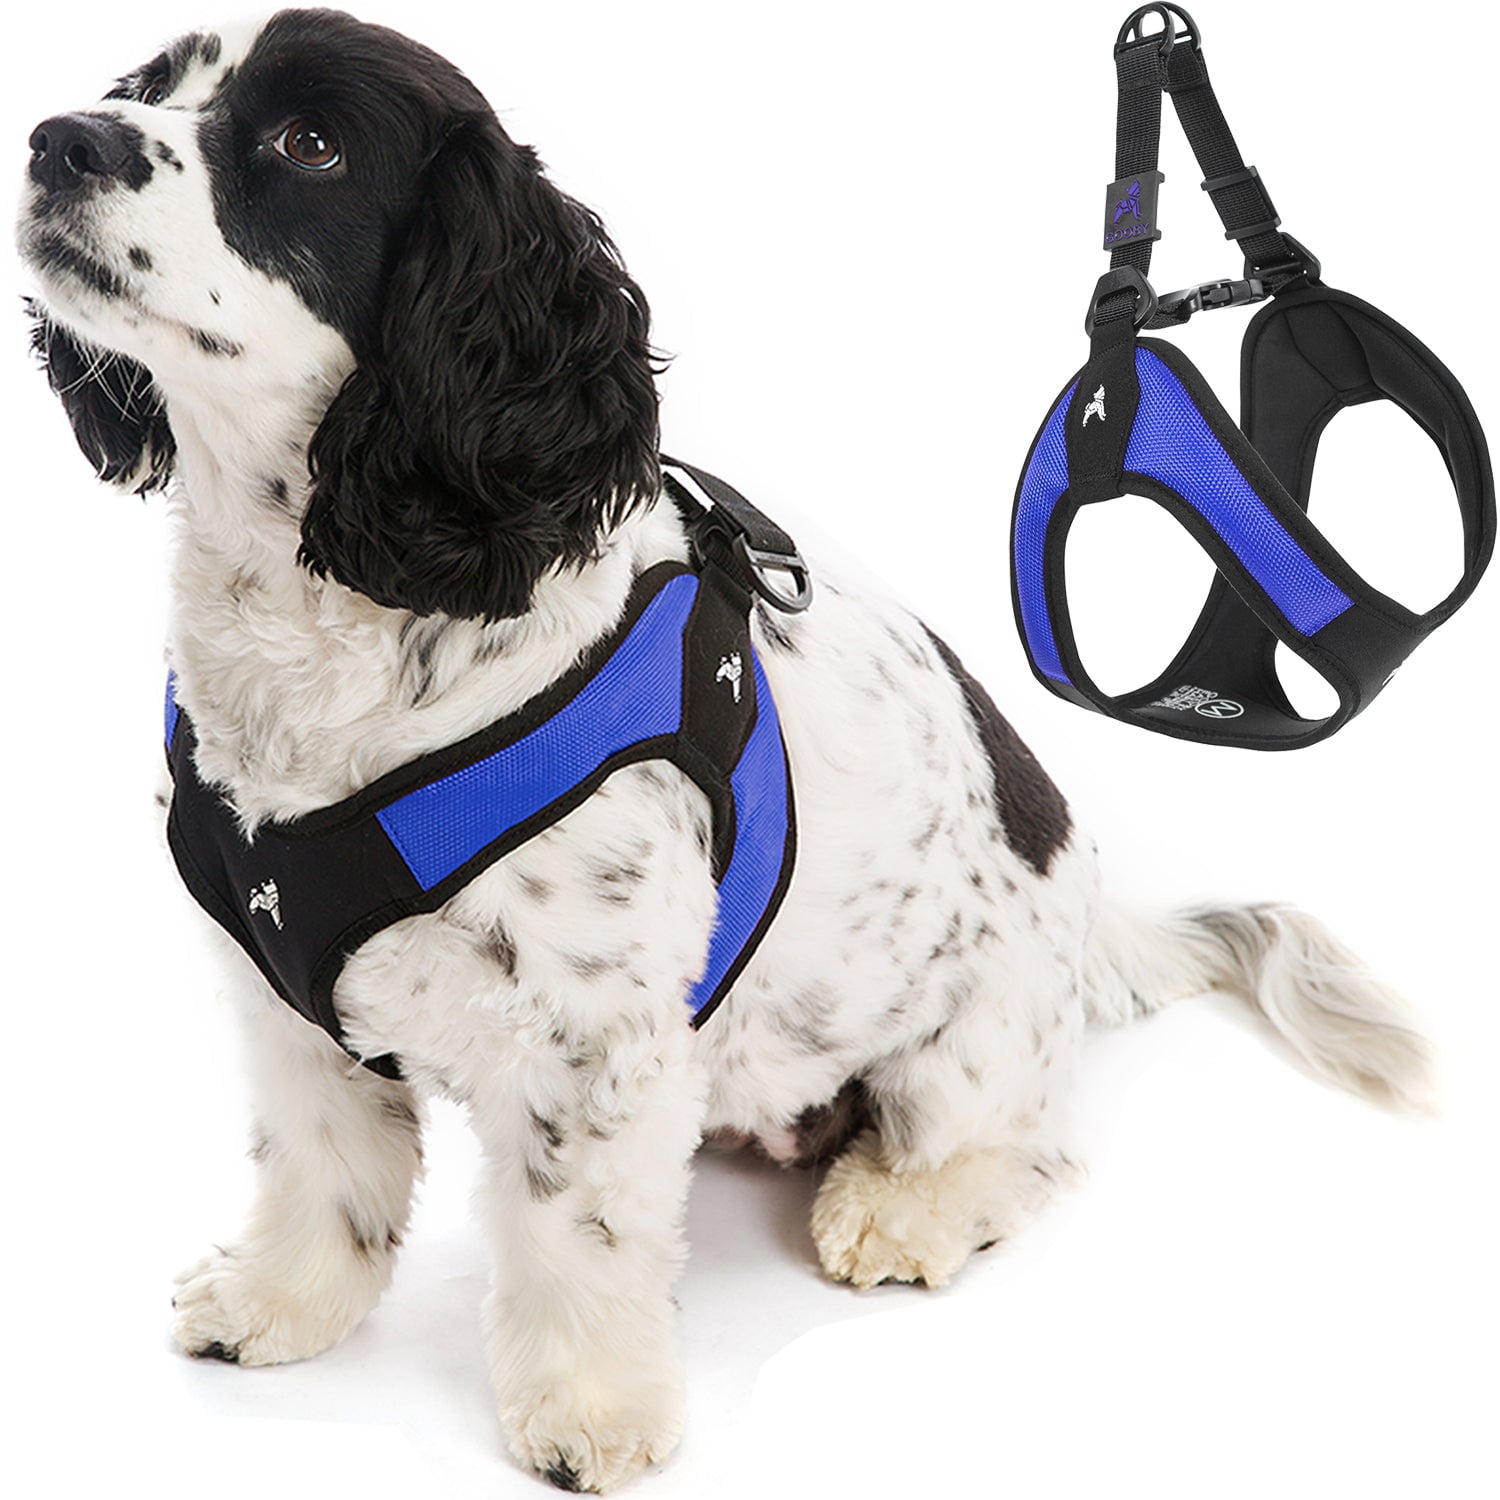 Gooby Escape Free Easy Fit Harness Red, Medium Escape Free Step-In  Harness with Neoprene Body for Small Dogs and Medium Dogs Indoor and  Outdoor use